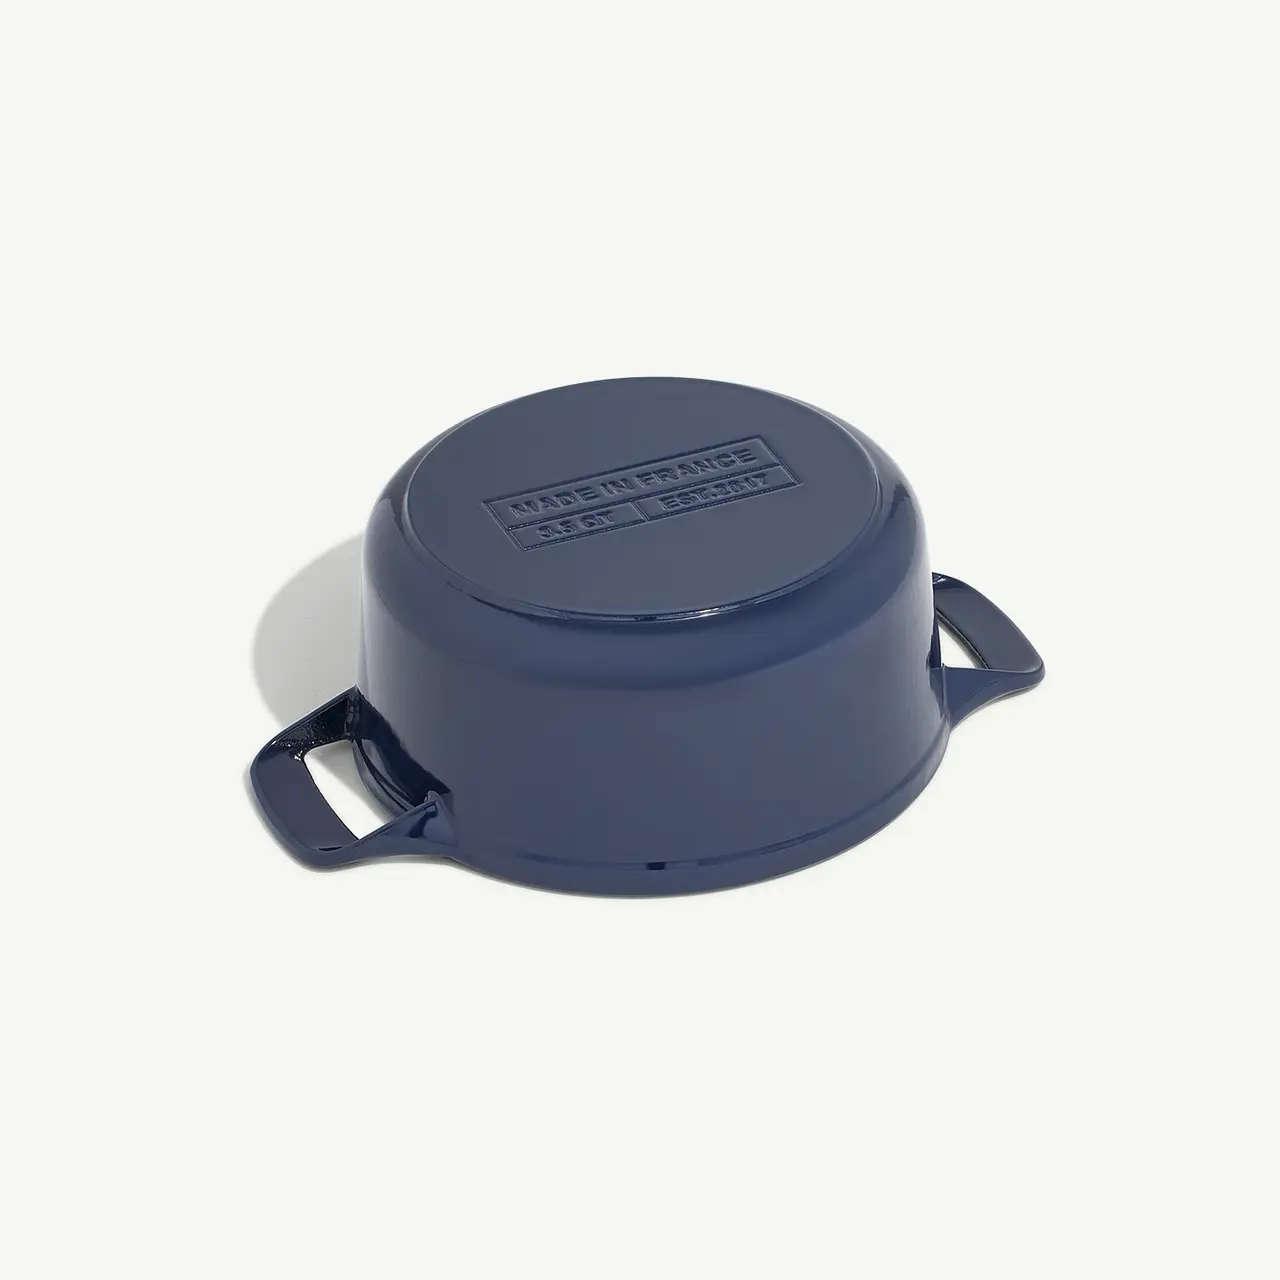 A blue enameled saucepan lid with two handles, viewed from above on a white background.